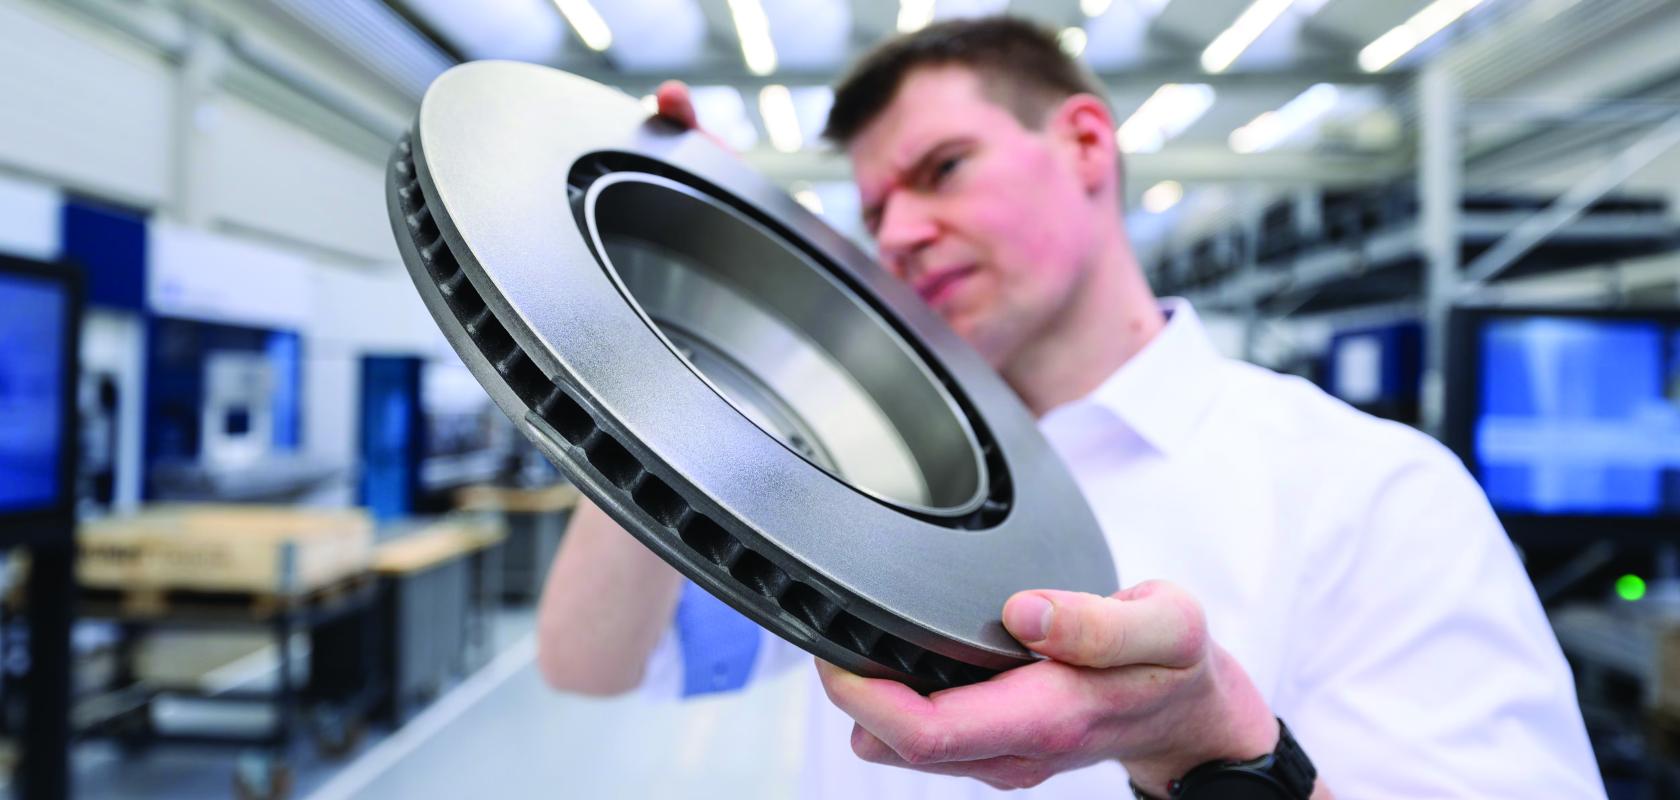 A TRUMPF employee with a brake disc